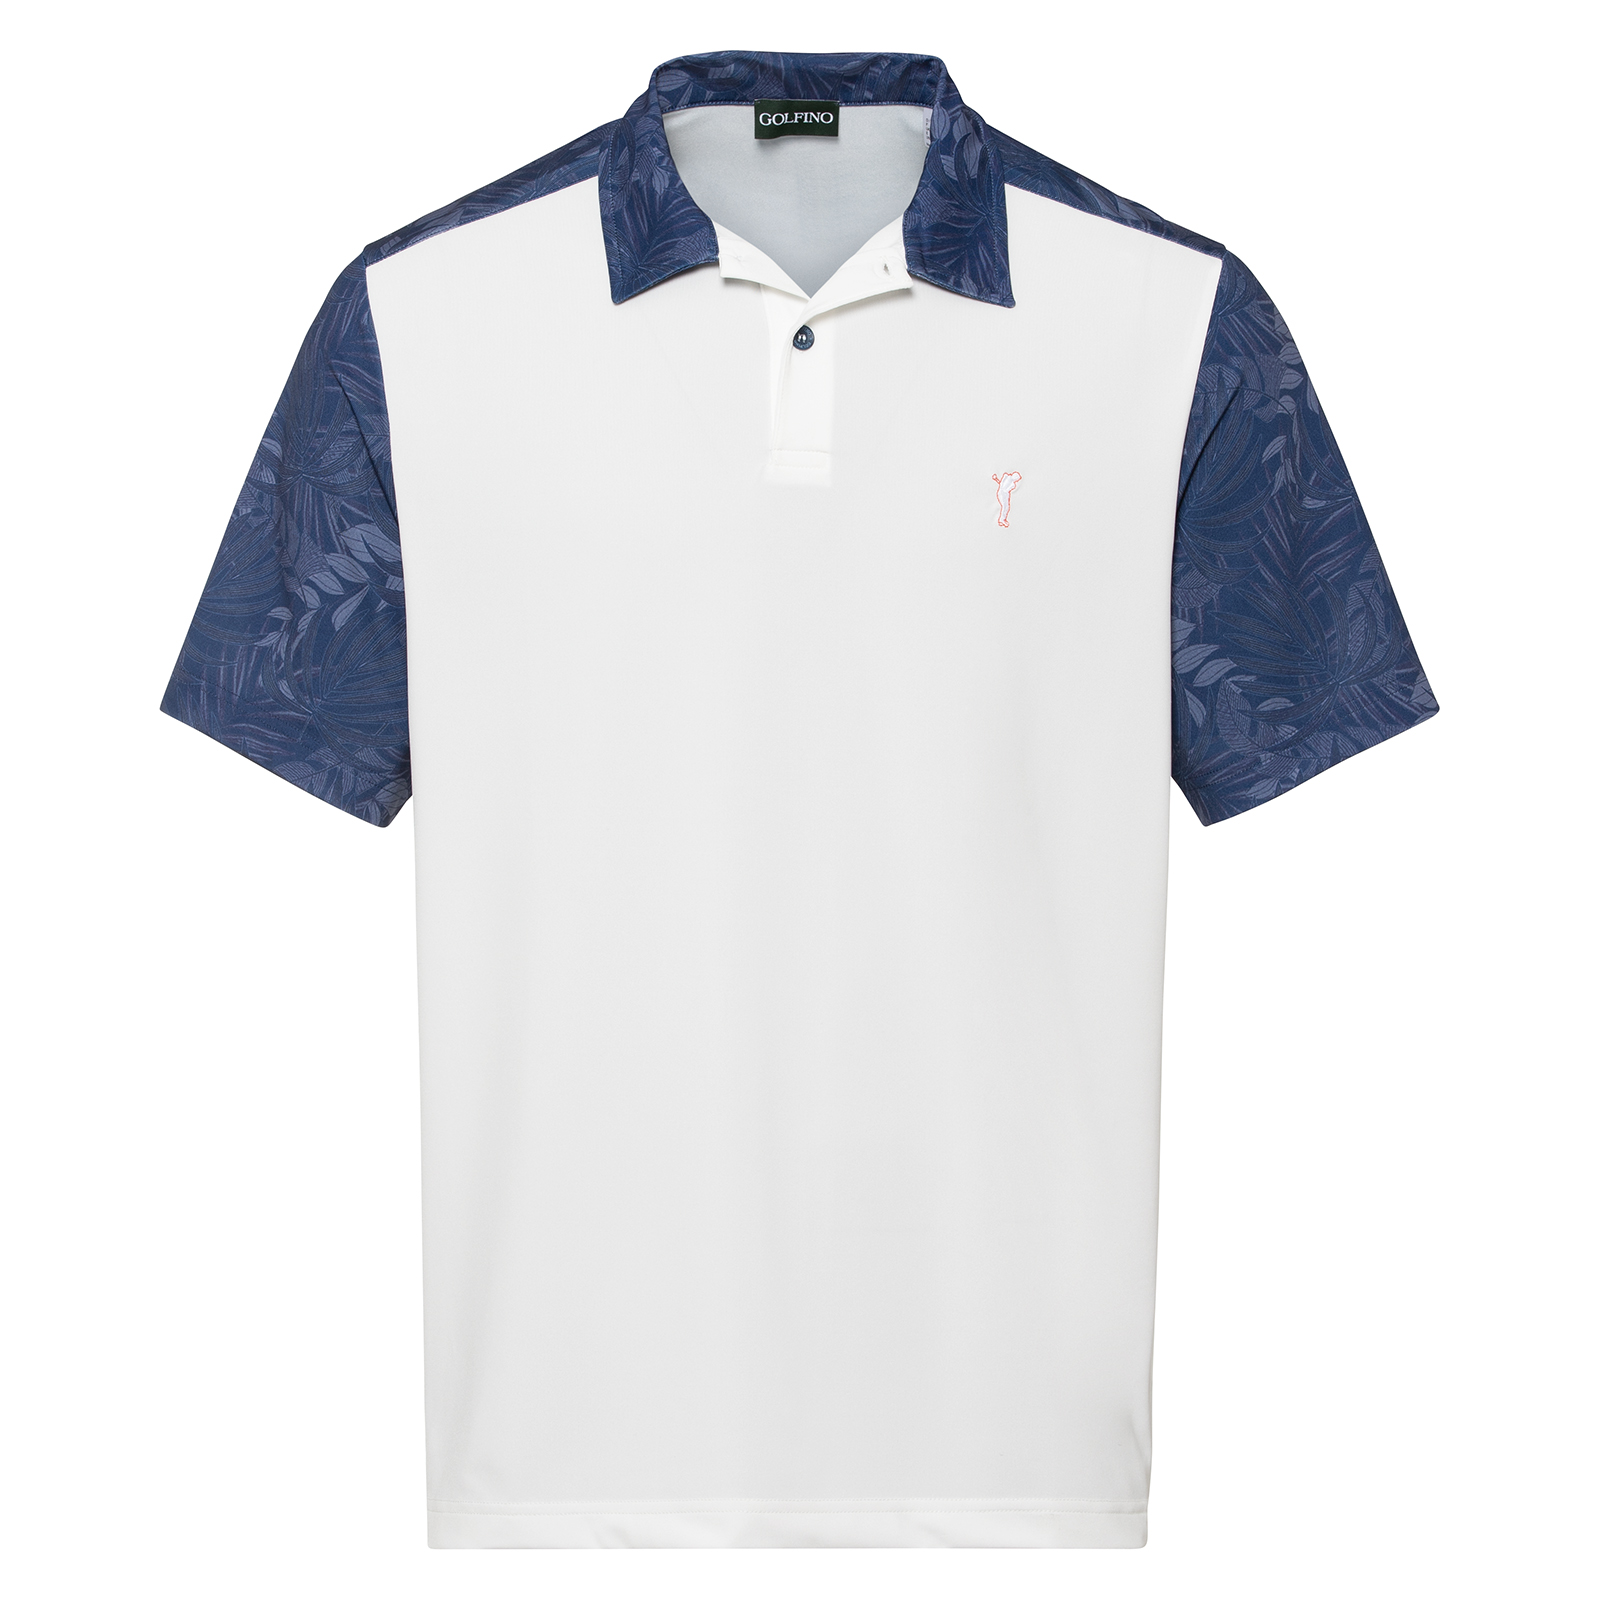 Men's golf polo shirt with colour blocking elements 